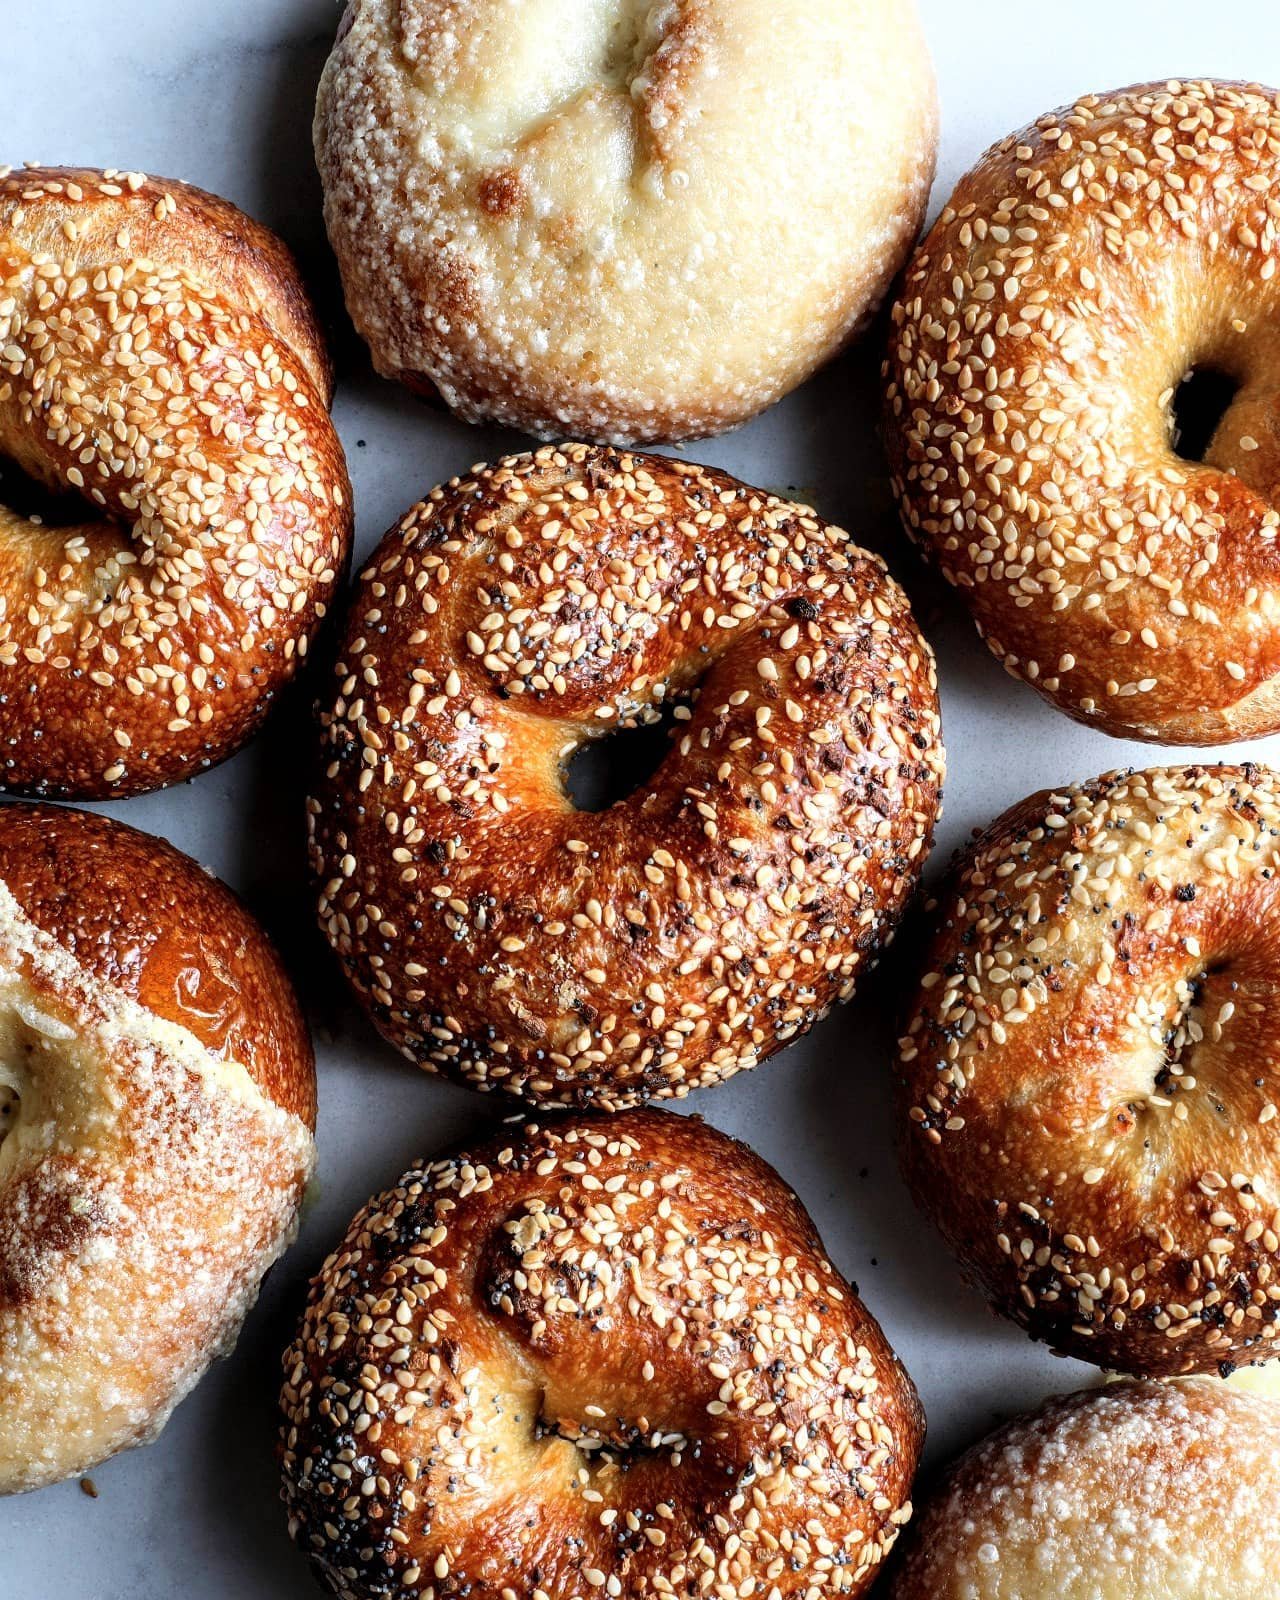 Thursday made better with a dozen of the most delicious bagels. We've been trying to order these bagels for weeks now (they usually sell out in minutes) and they did not disappoint. For anyone living in Seattle and willing to drive @harrysfinefoods i